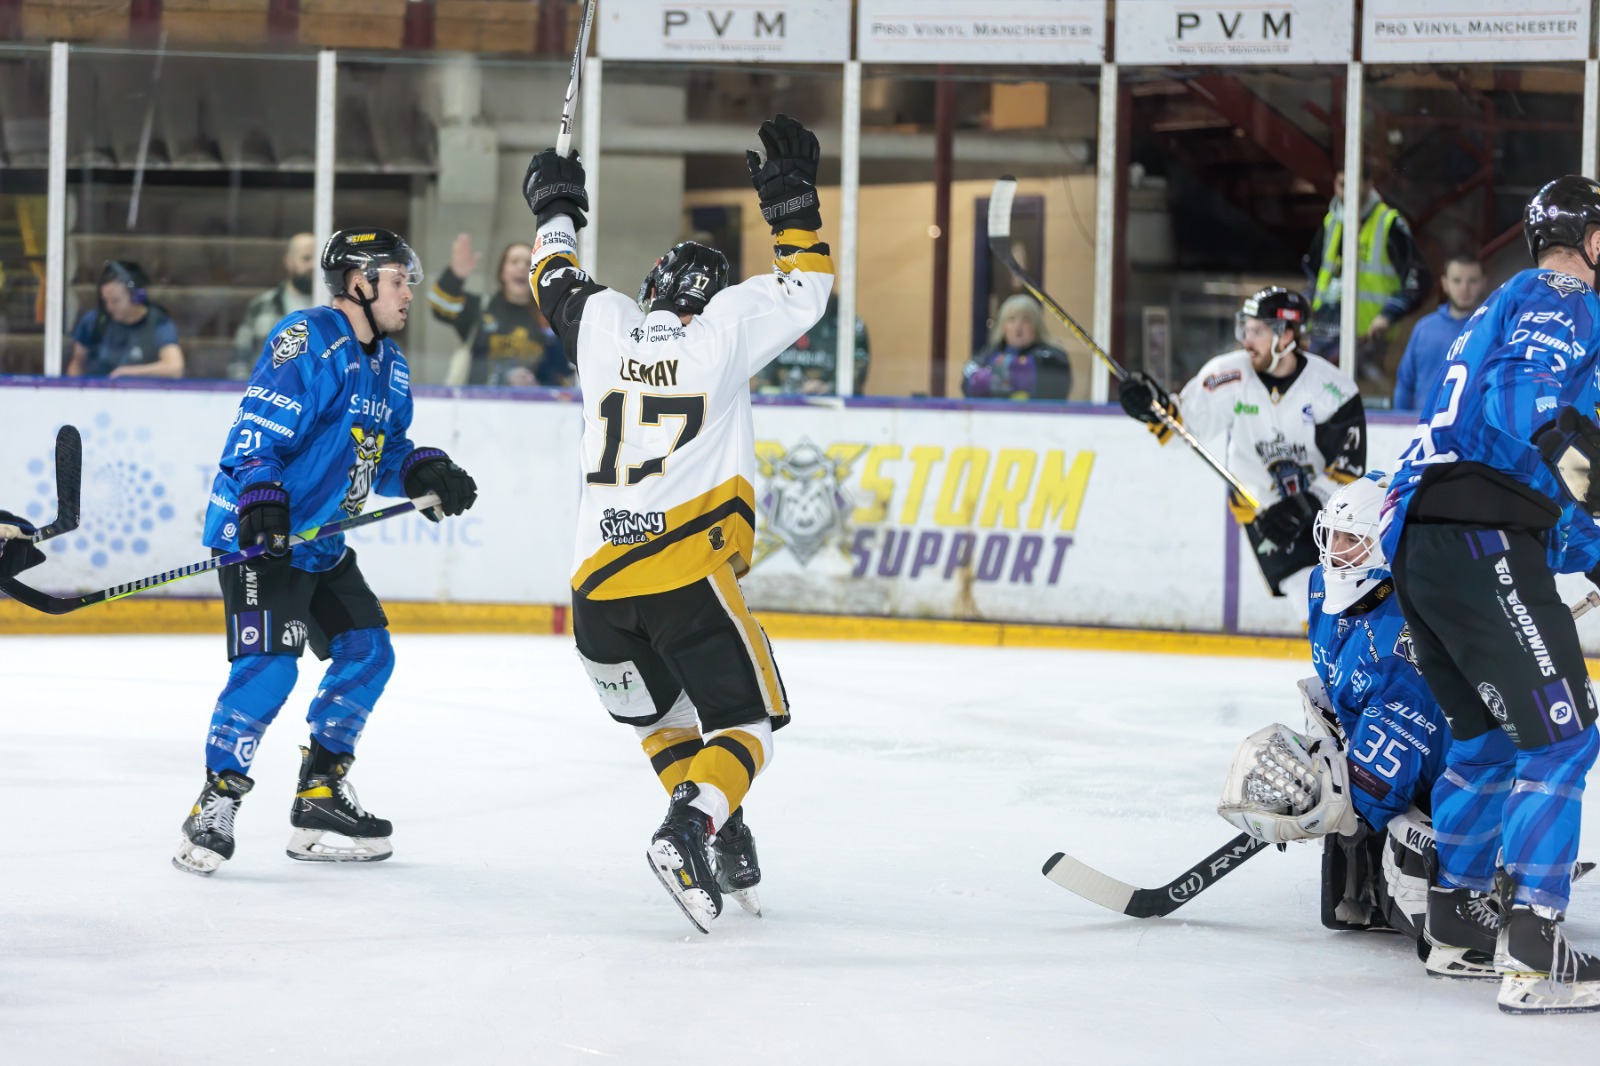 GAMEDAY FOR PANTHERS WITH ROADTRIP TO FACE STORM Top Image